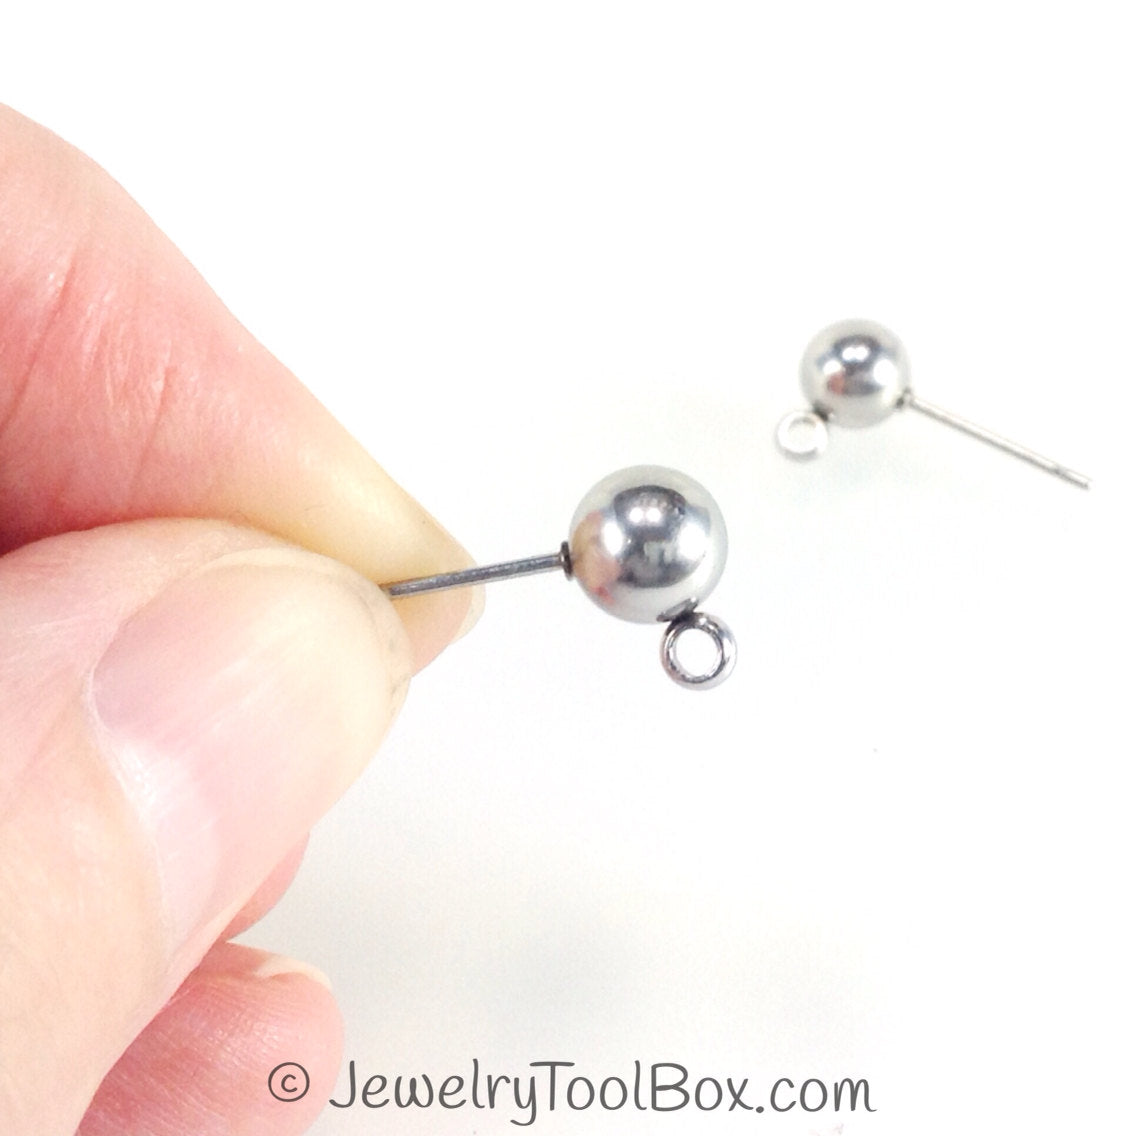 NonSoloArgenti |Earrings Silver 925 balls balls in 2 sizes 10 and 8 mm  rhodium yellow gold woman